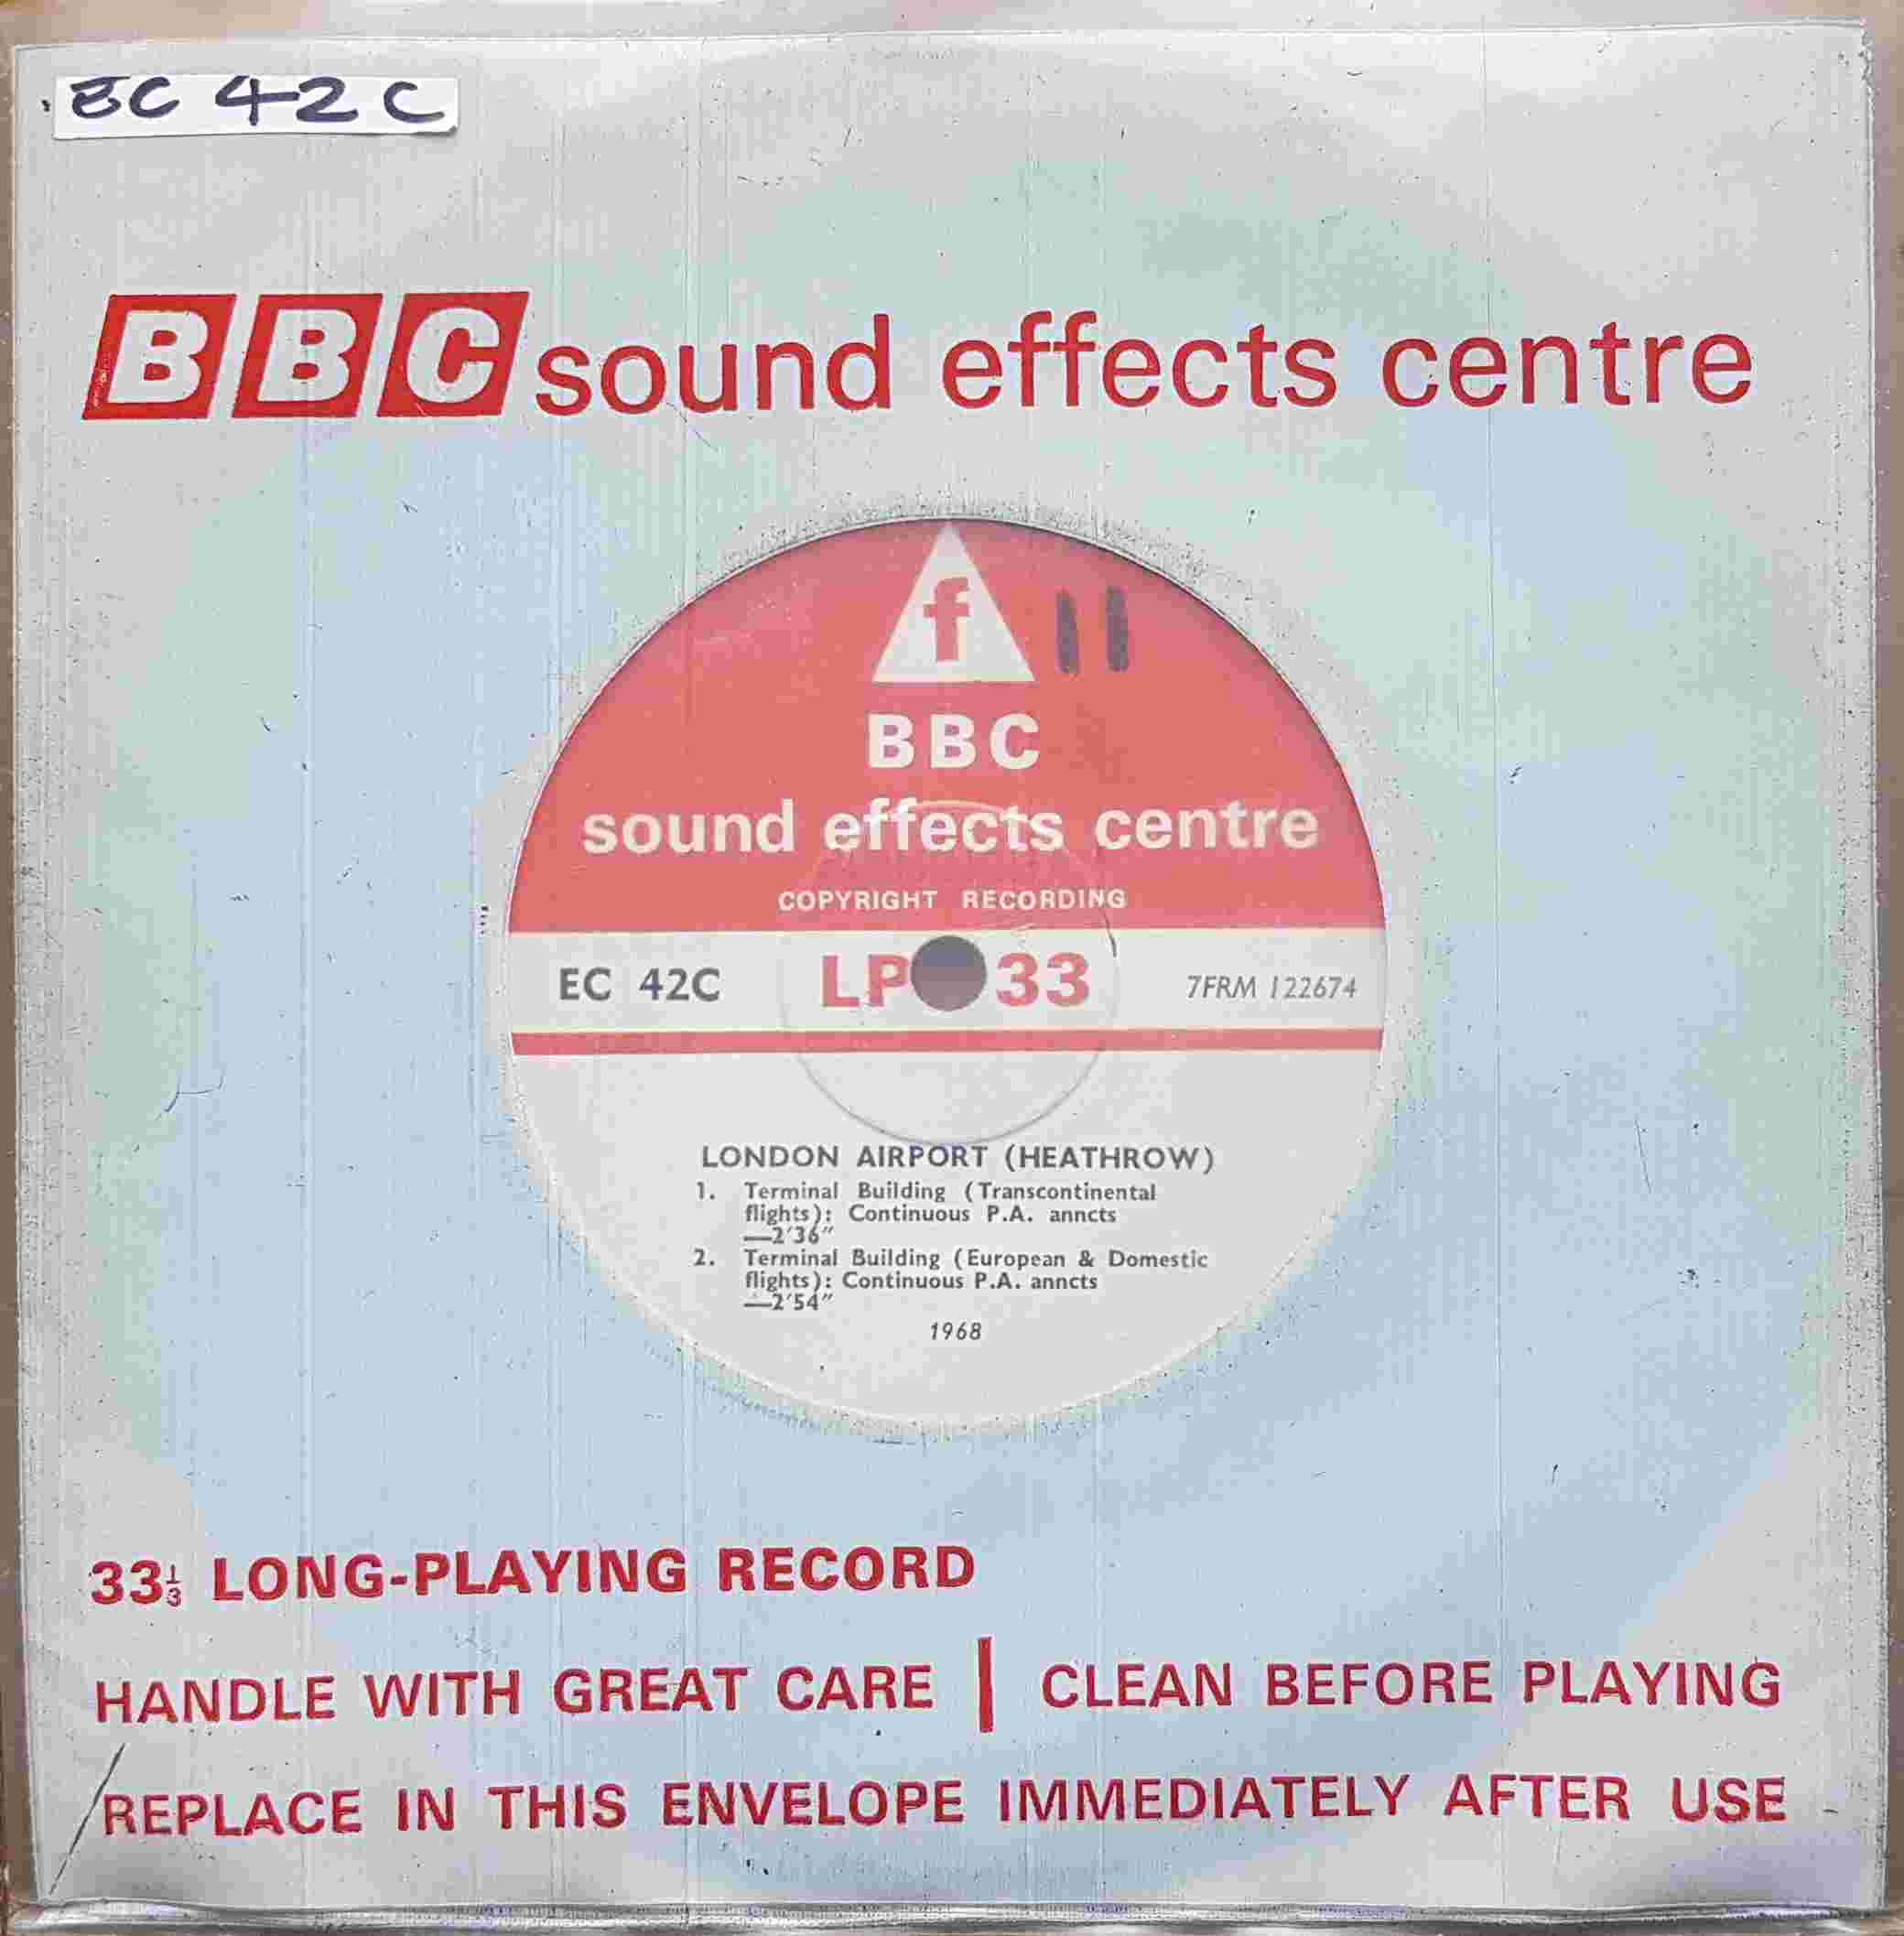 Picture of EC 42C London airport (Heathrow) -1968 by artist Not registered from the BBC records and Tapes library